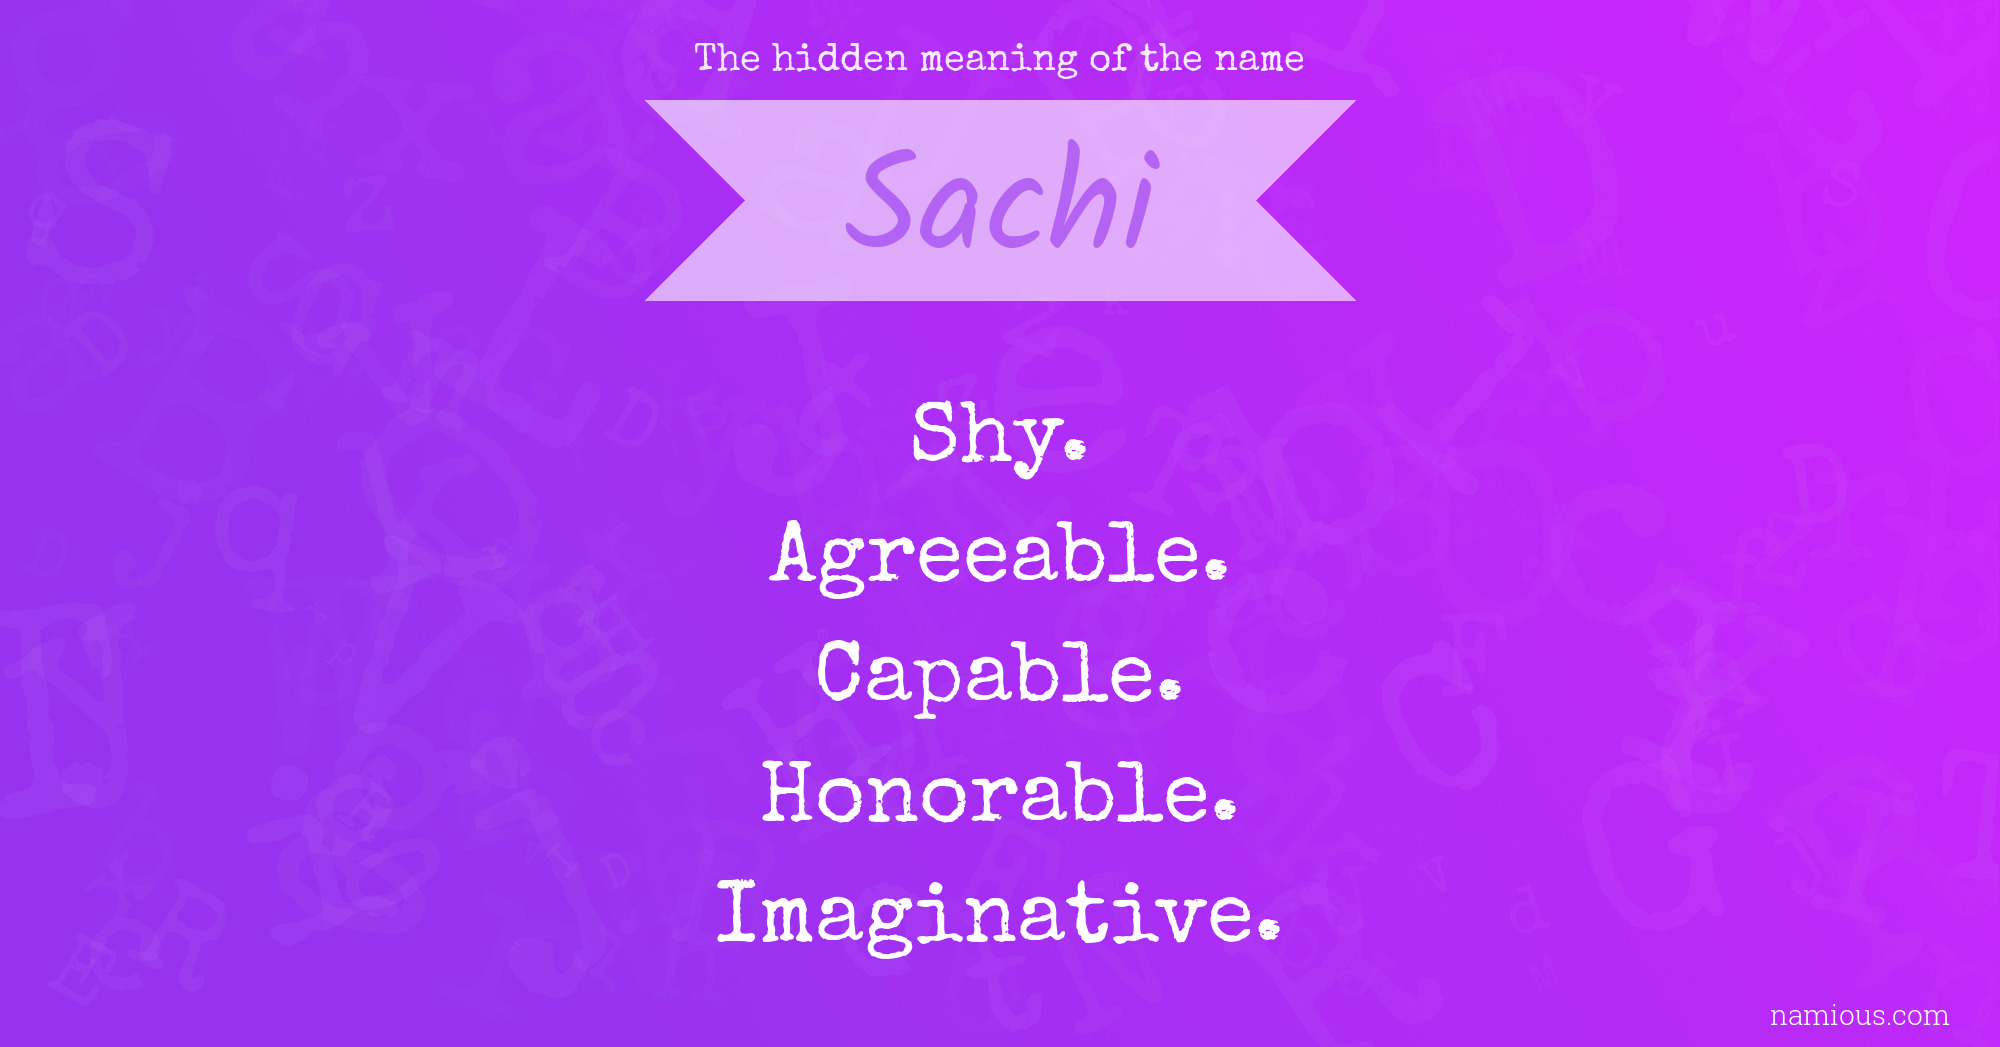 The hidden meaning of the name Sachi